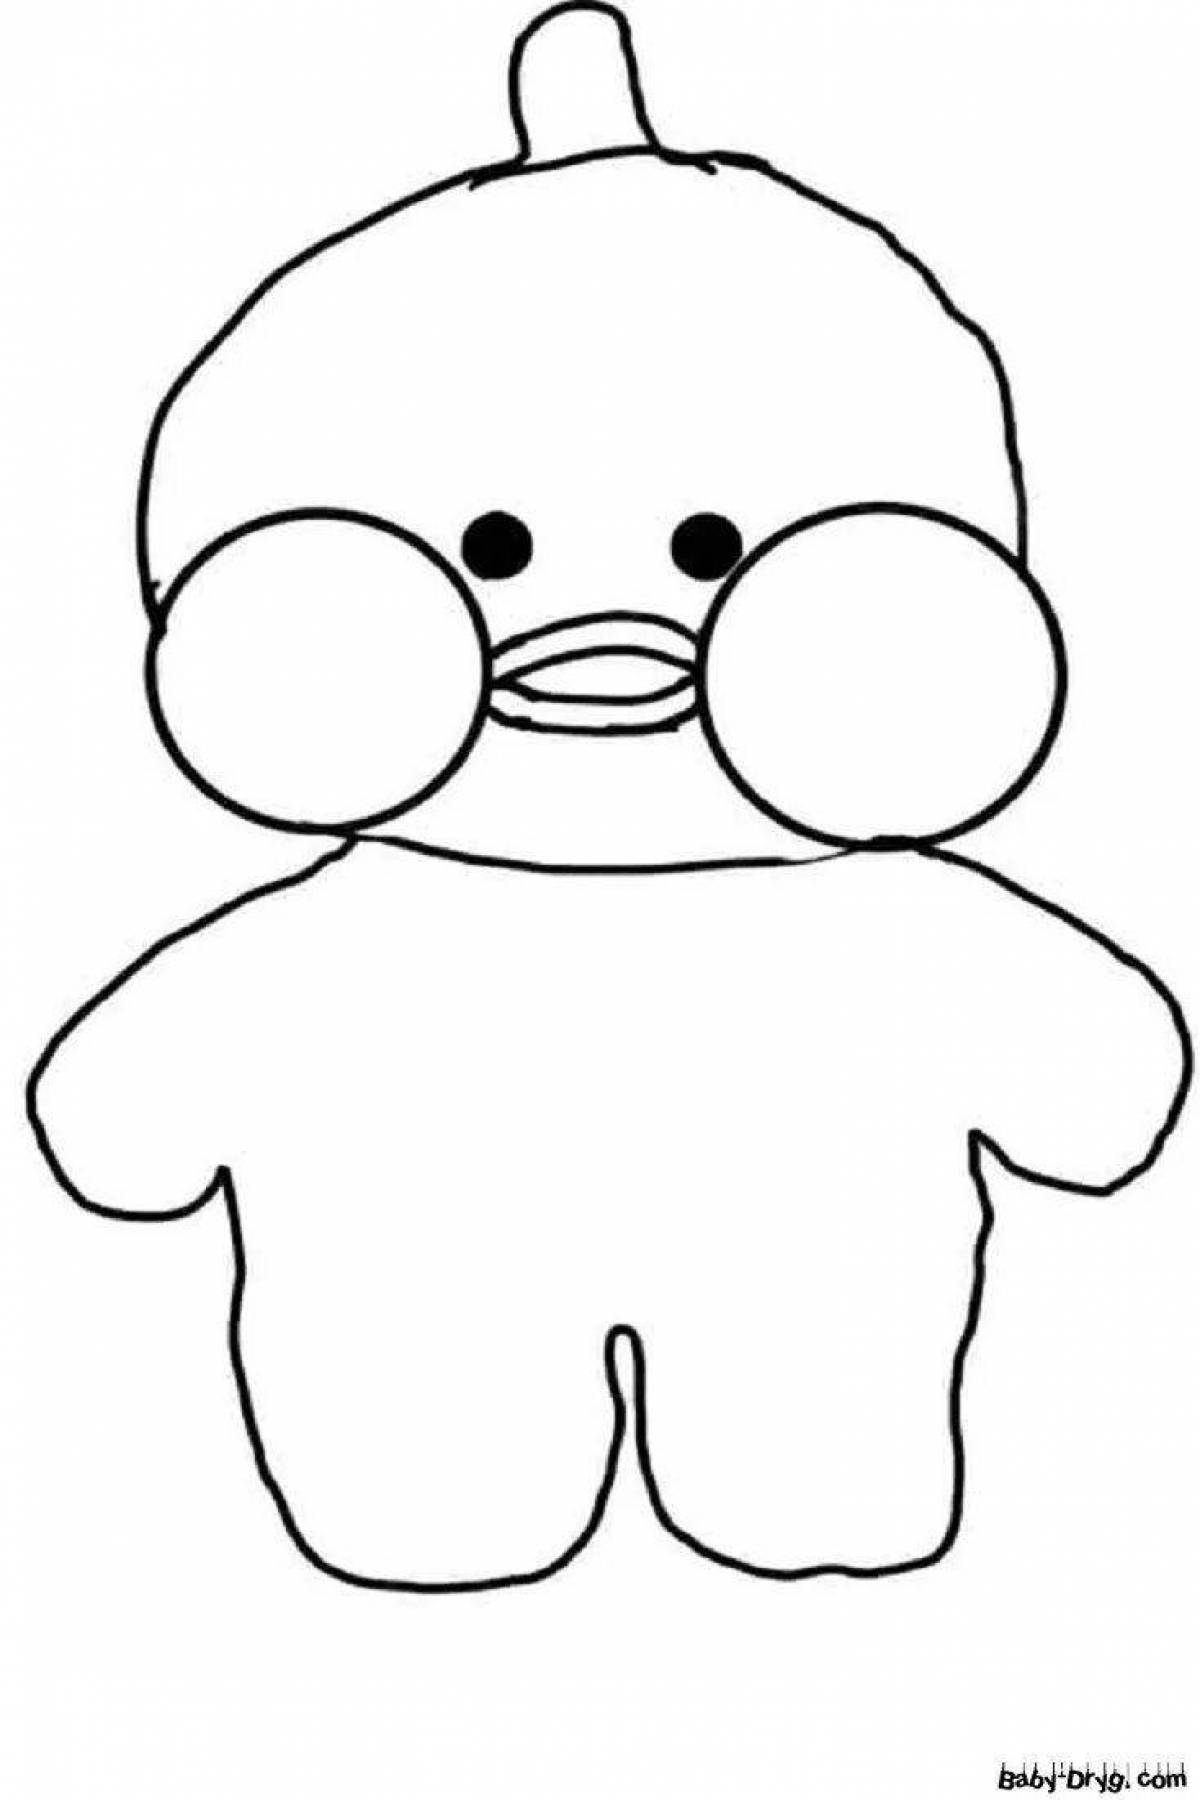 Charming lola fanfan duck coloring page